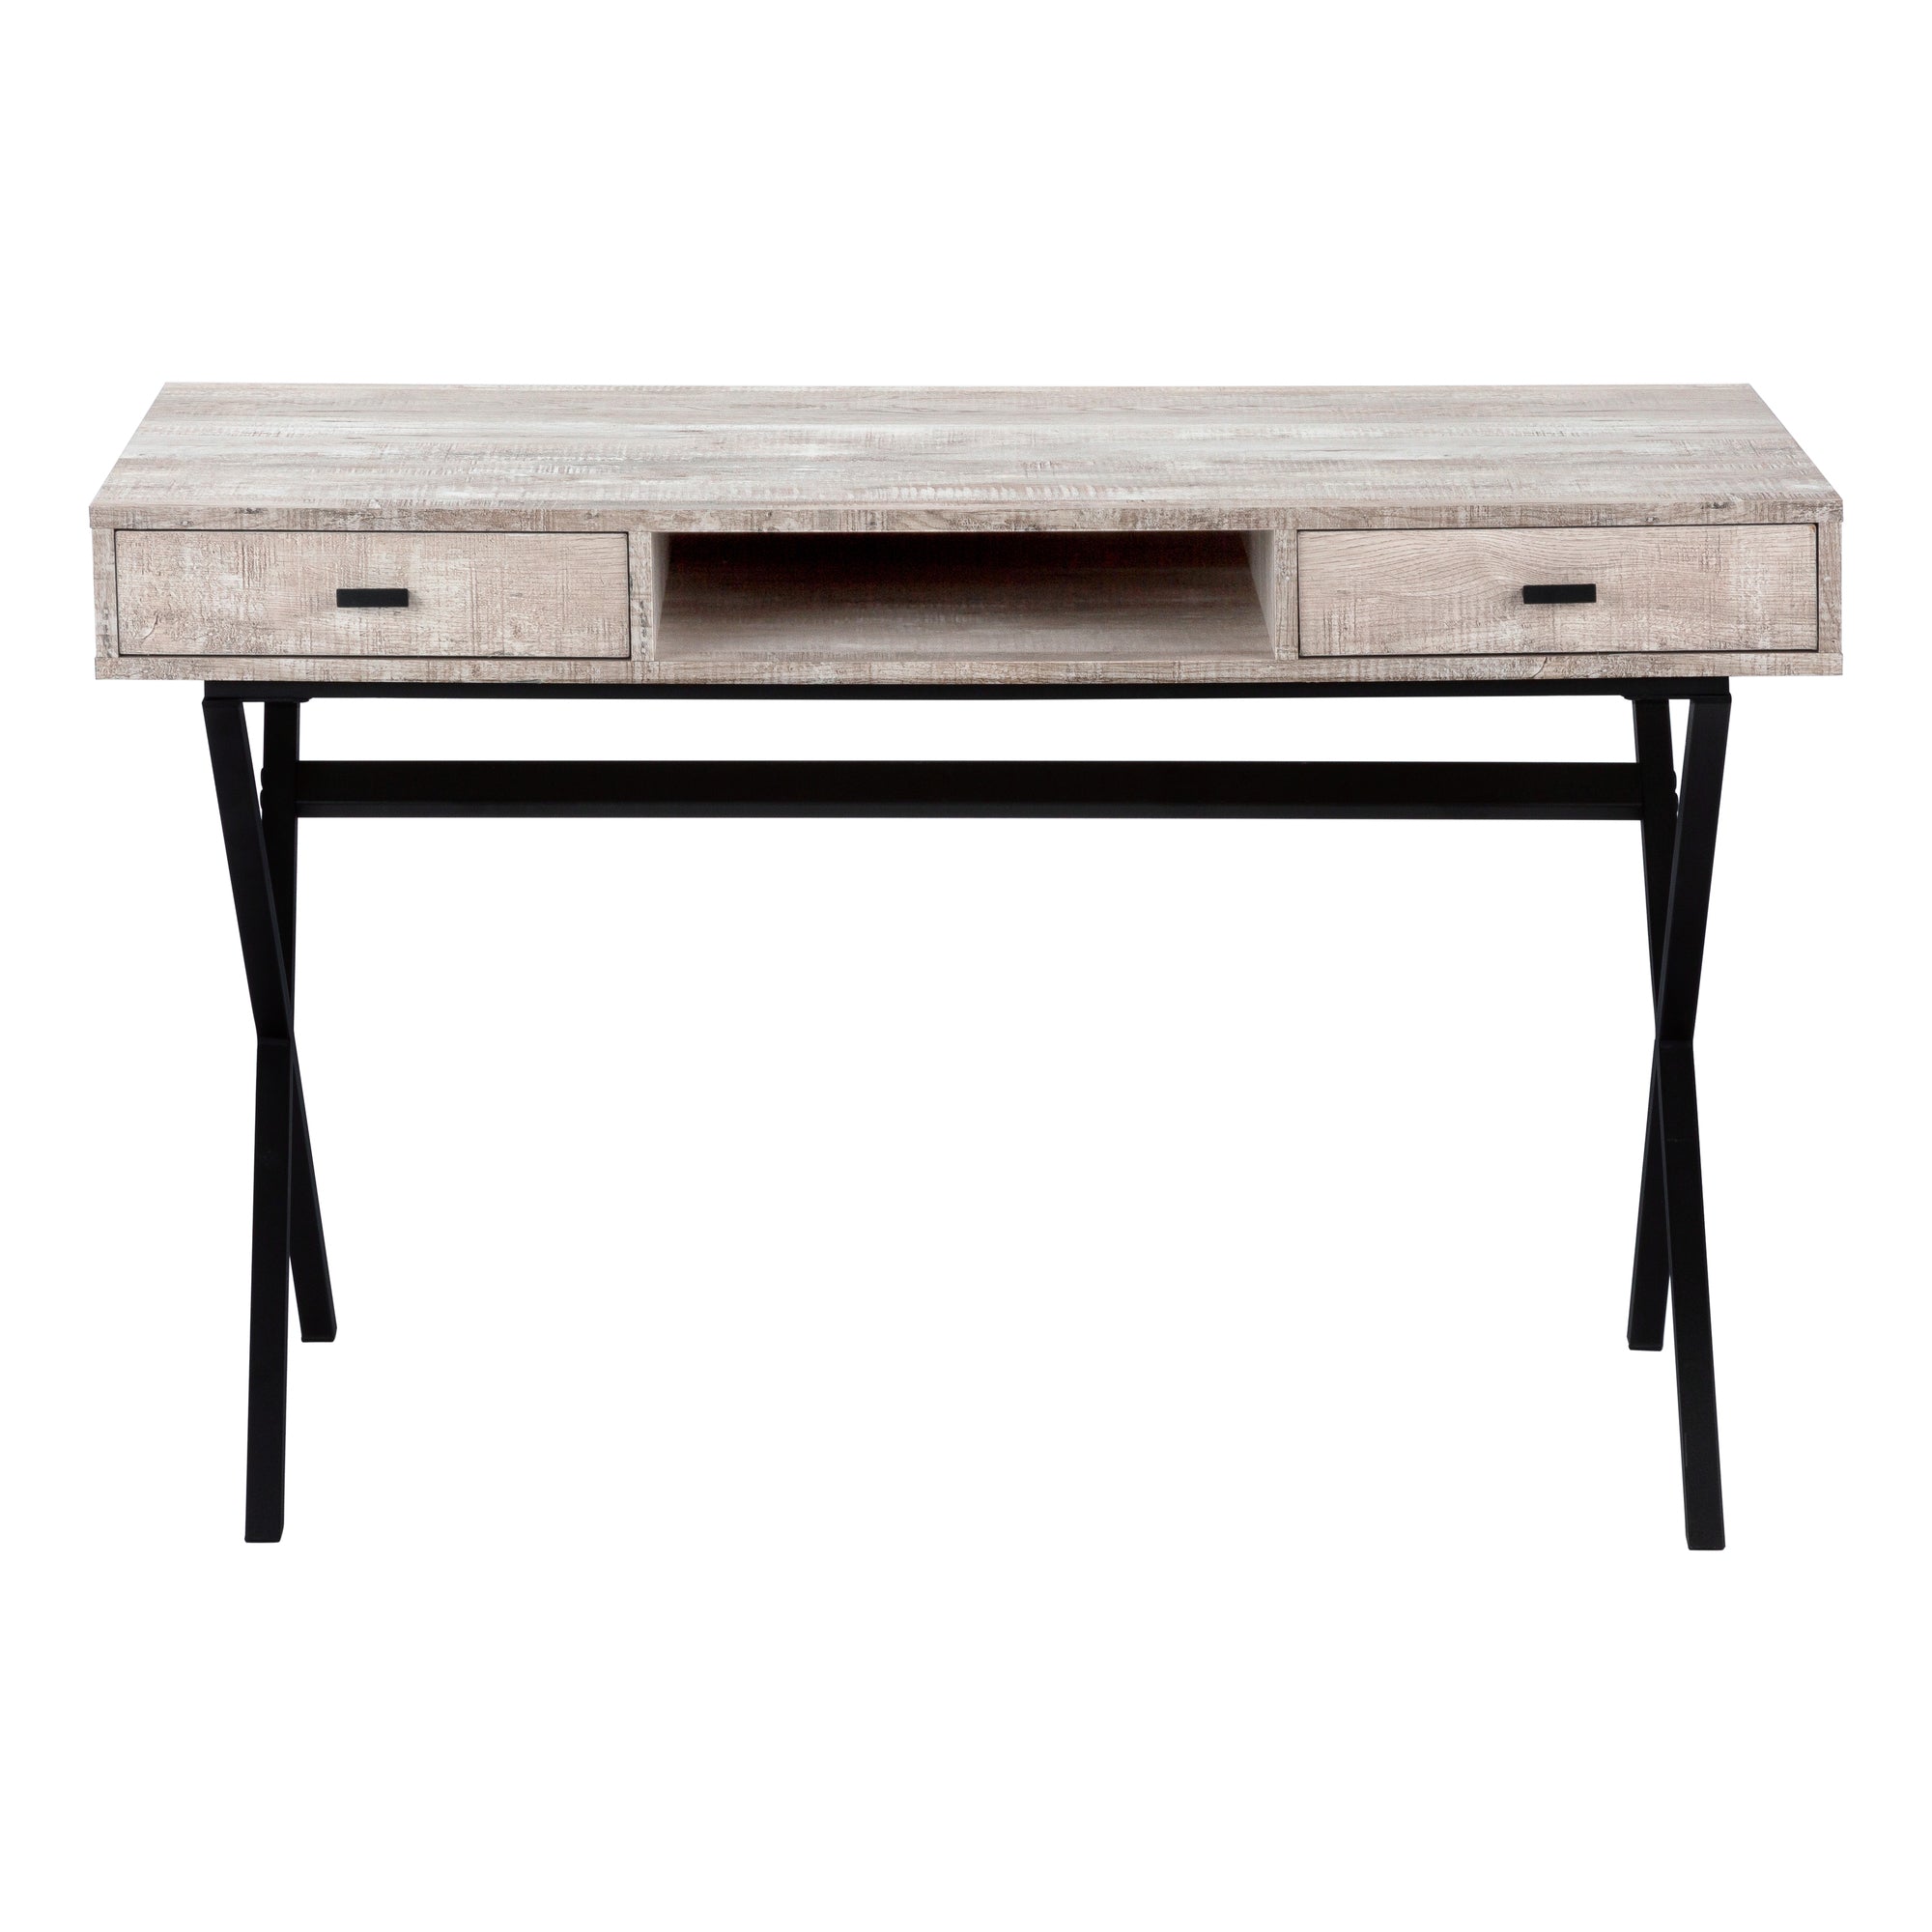 MN-177449    Computer Desk, Home Office, Laptop, Storage Drawers, 48"L, Metal, Laminate, Taupe Reclaimed Wood Look, Black, Contemporary, Modern